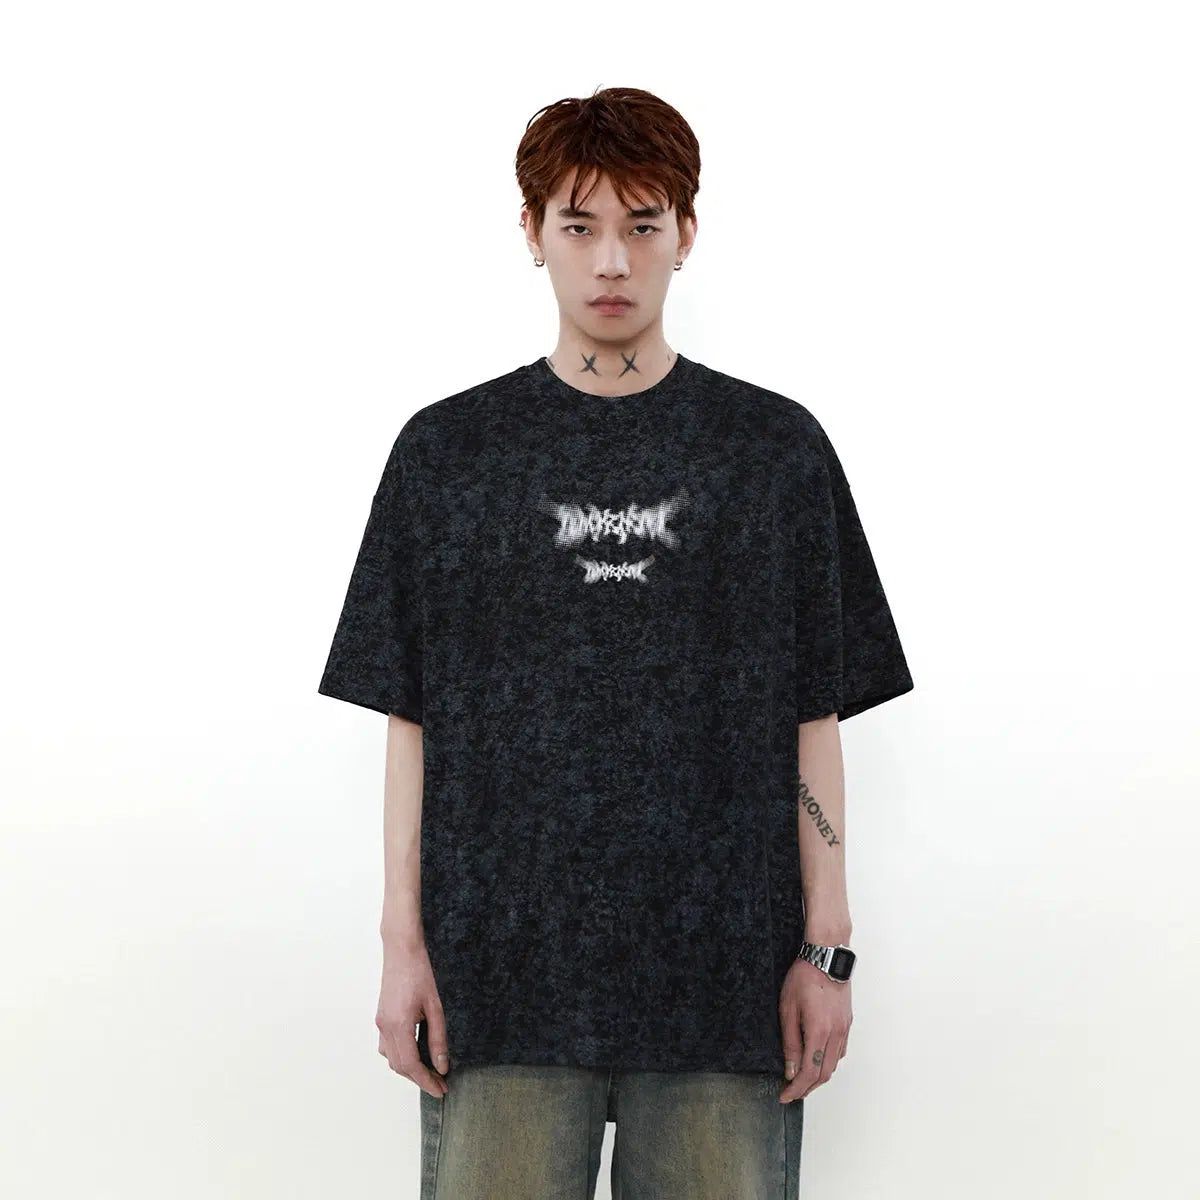 Goth Letters & Graphic T-Shirt Korean Street Fashion T-Shirt By Mr Nearly Shop Online at OH Vault